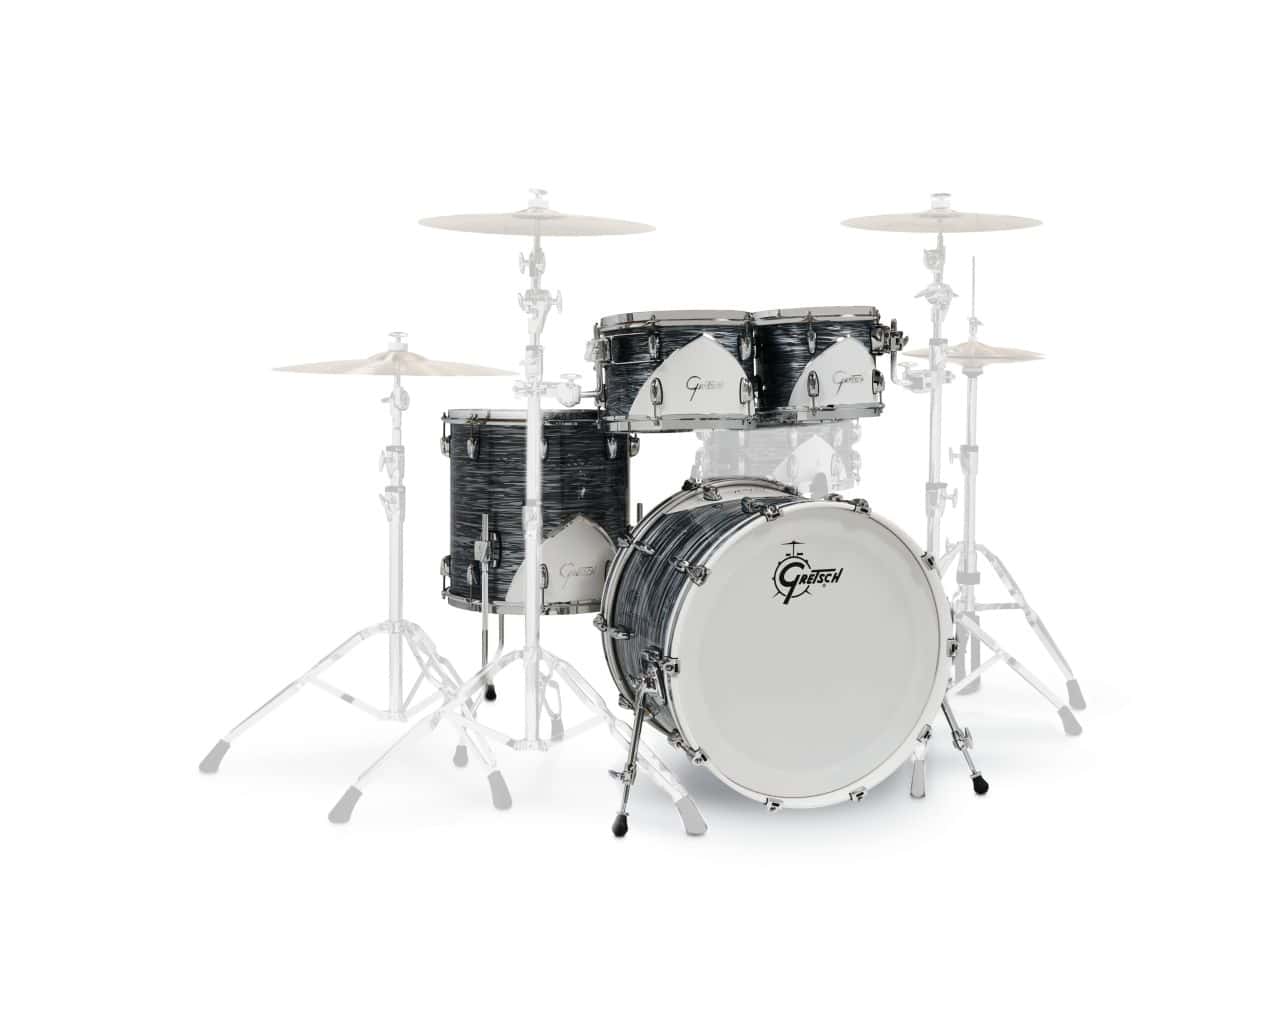 GRETSCH DRUMS SHELL SET RENOWN 57 LIMITED RN57-E425V-SO